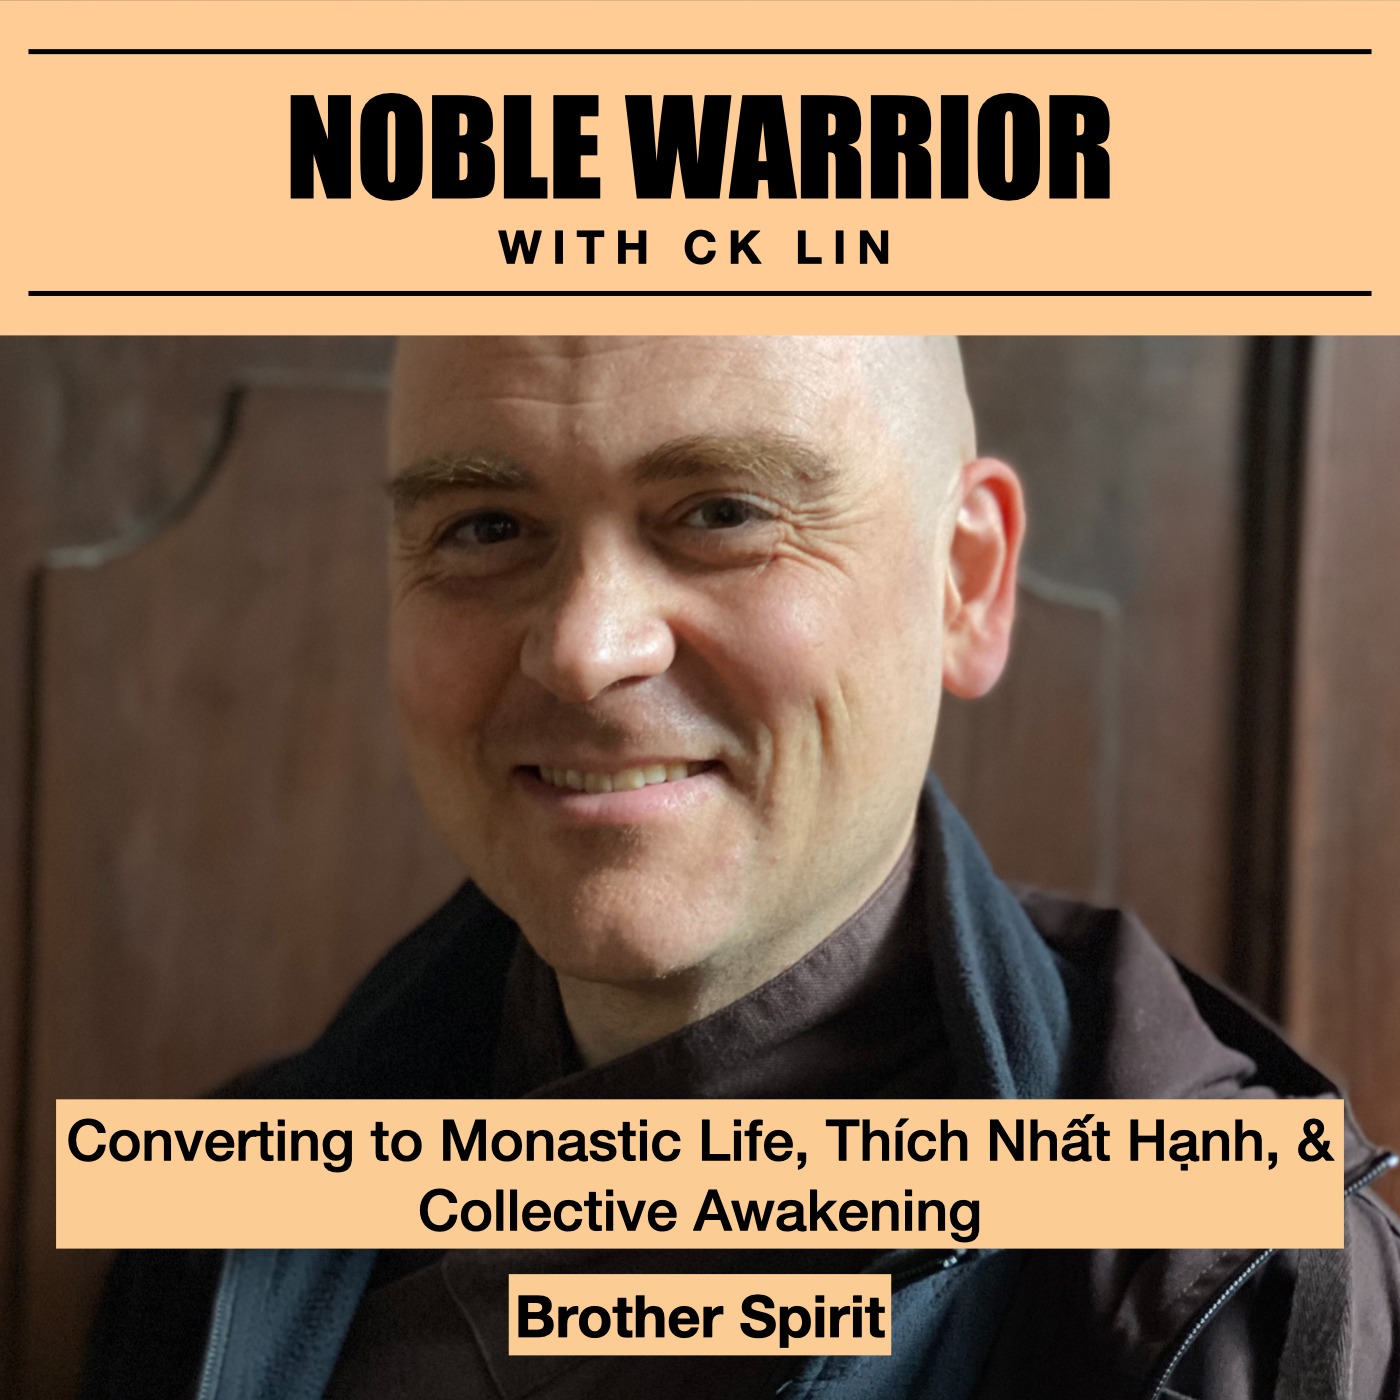 143 Brother Spirit: Converting to Monastic Life, Thích Nhất Hạnh, & Collective Awakening Image